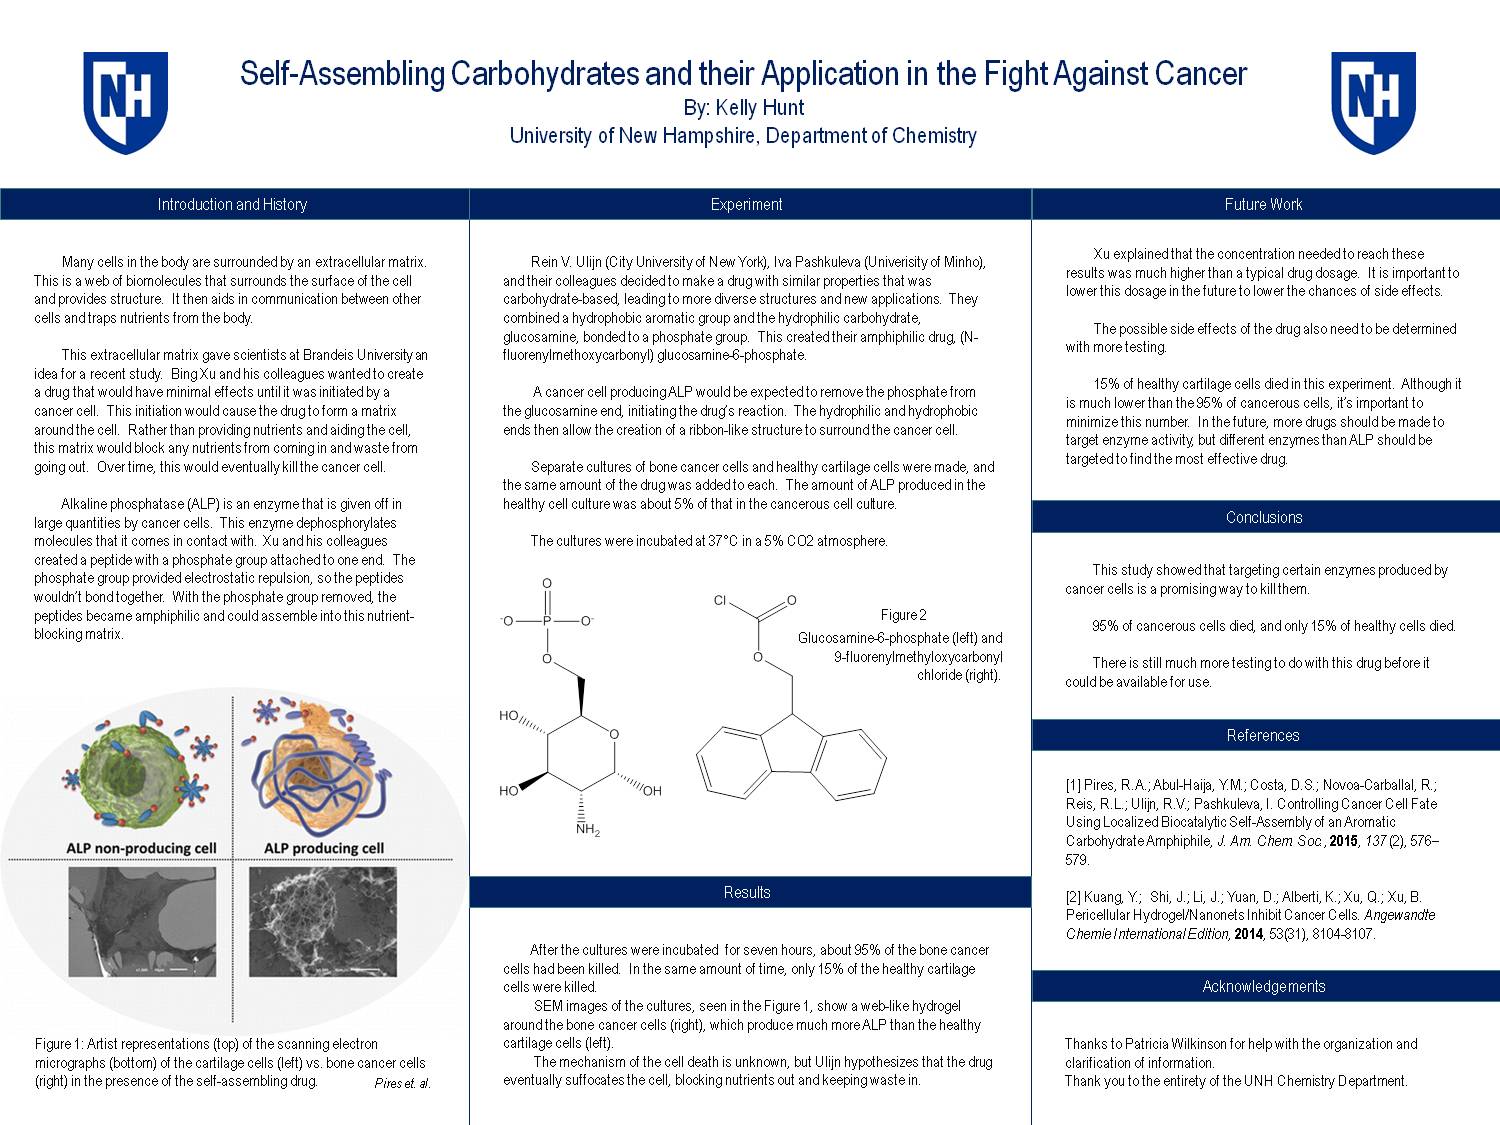 Self-Assembling Carbohydrates And Their Application In The Fight Against Cancer by kmy2576